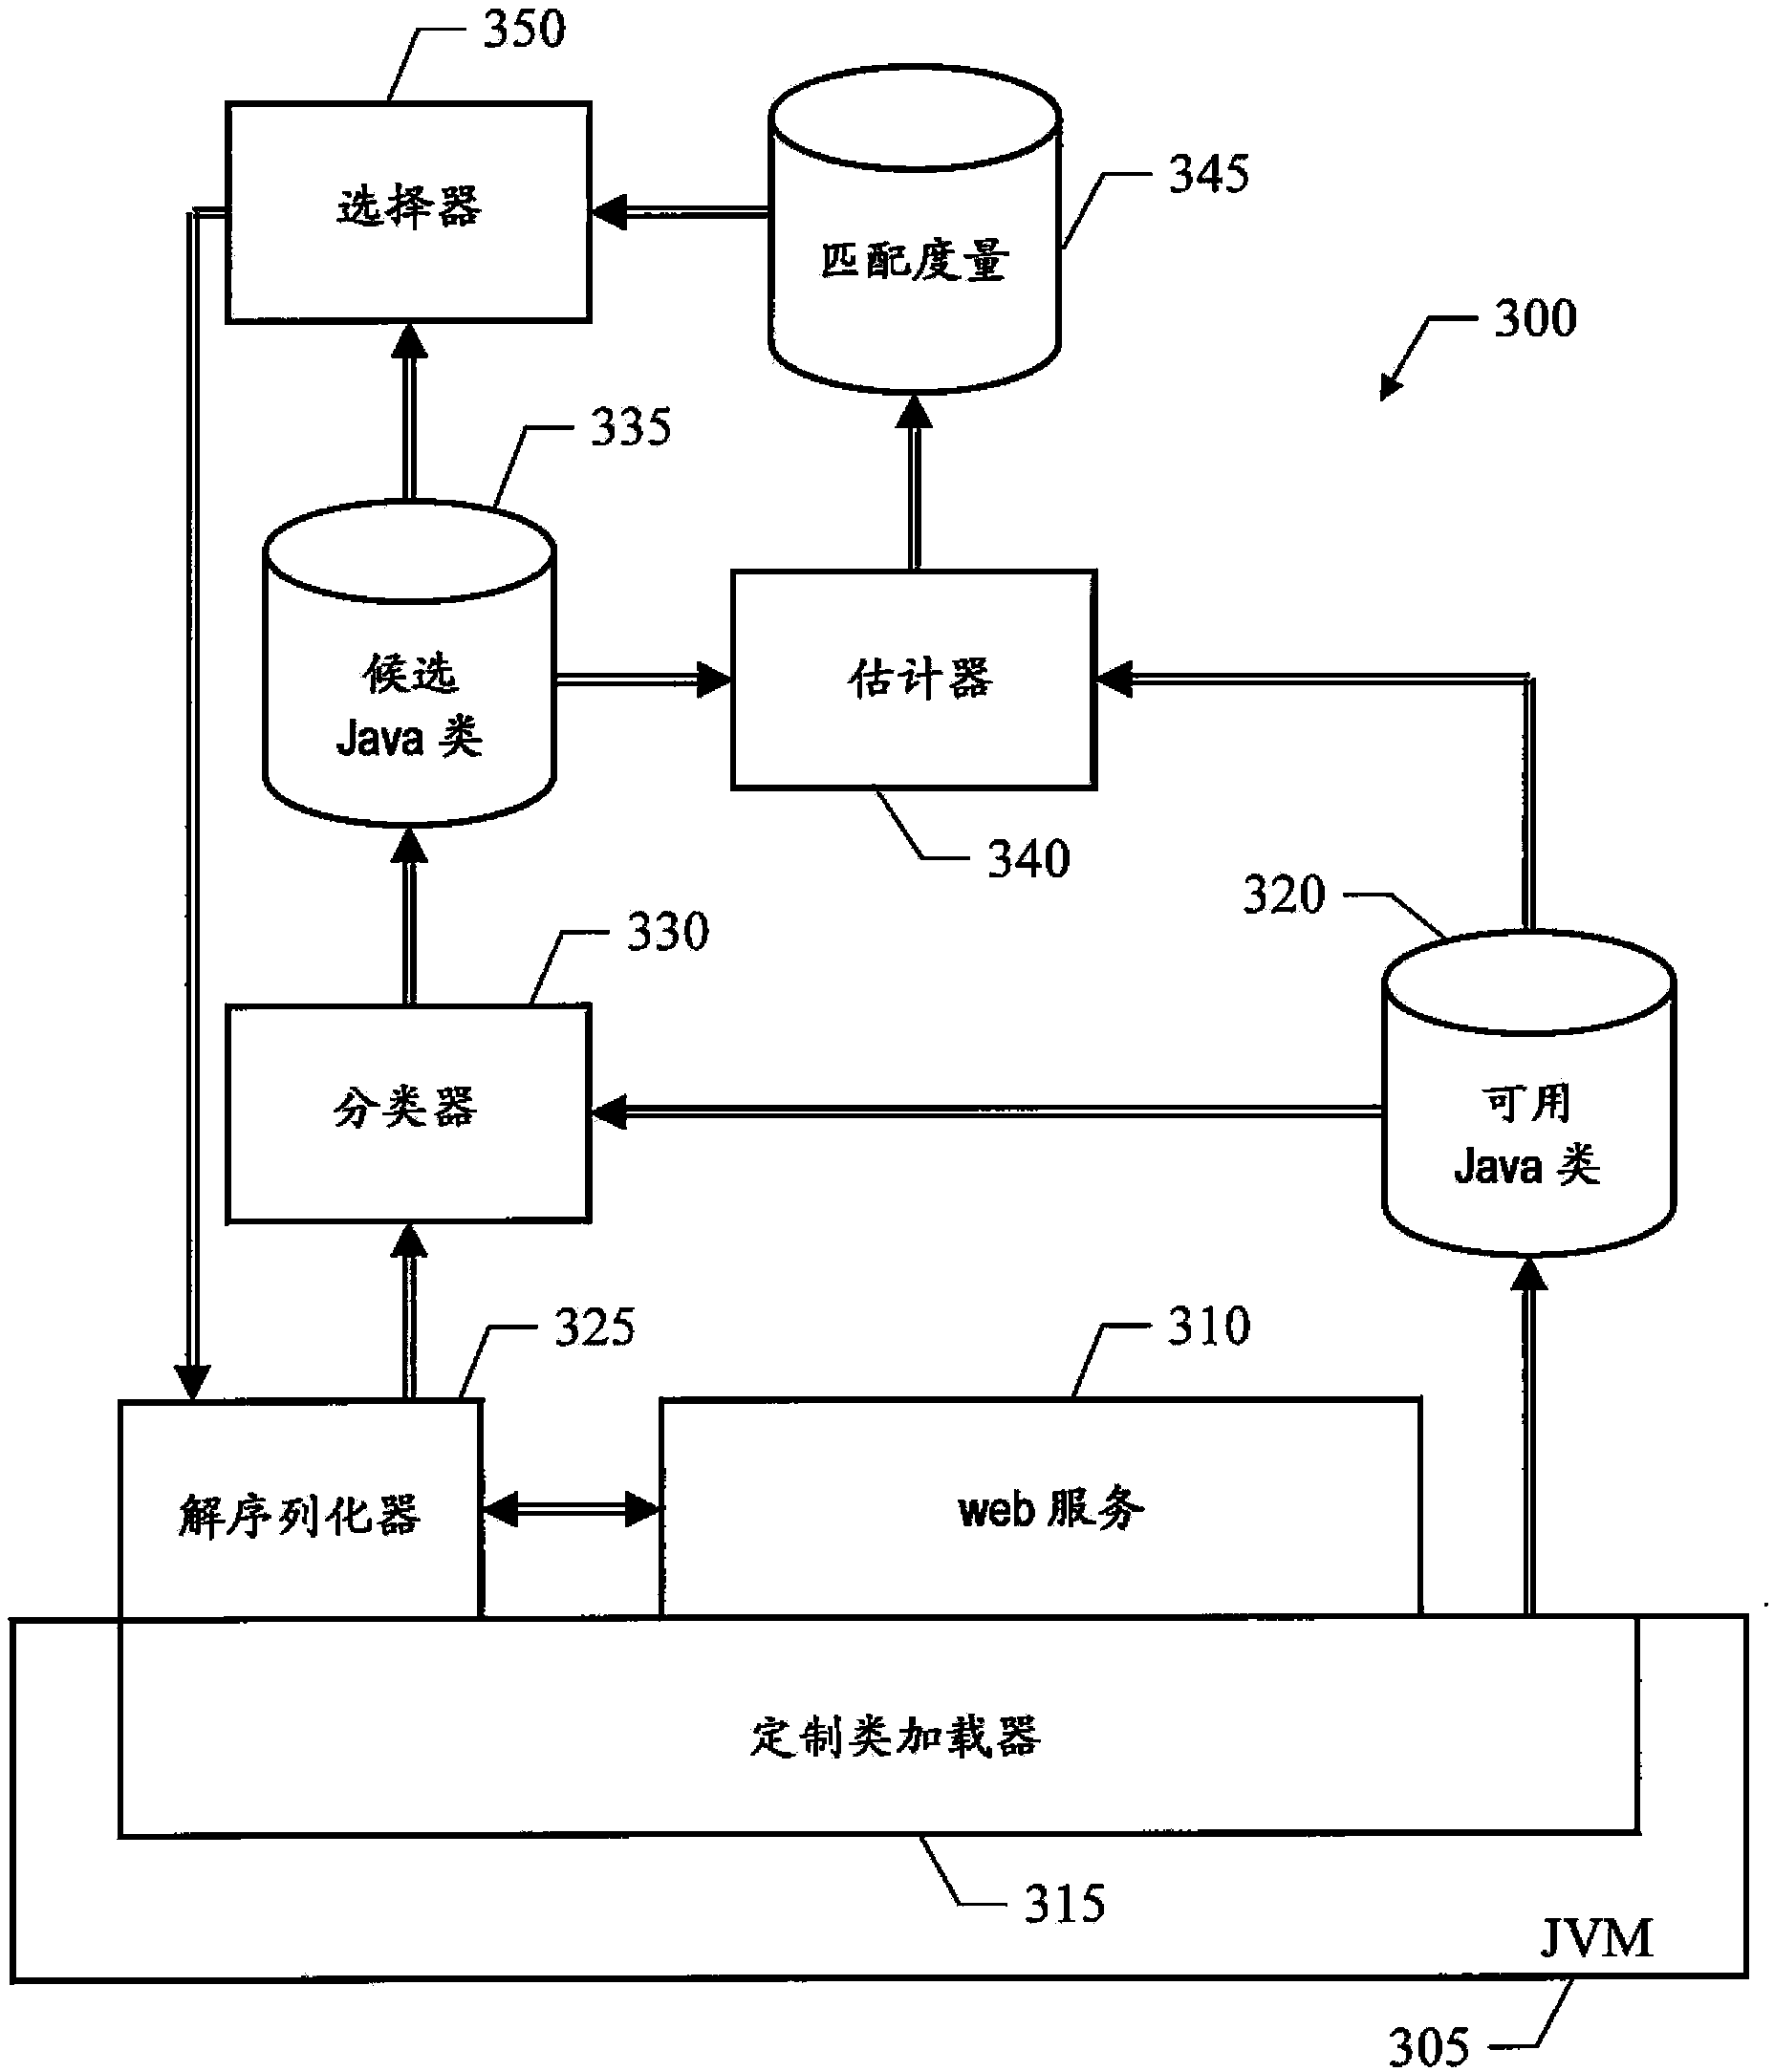 Method and system for de-serializing source object of source software into target software component